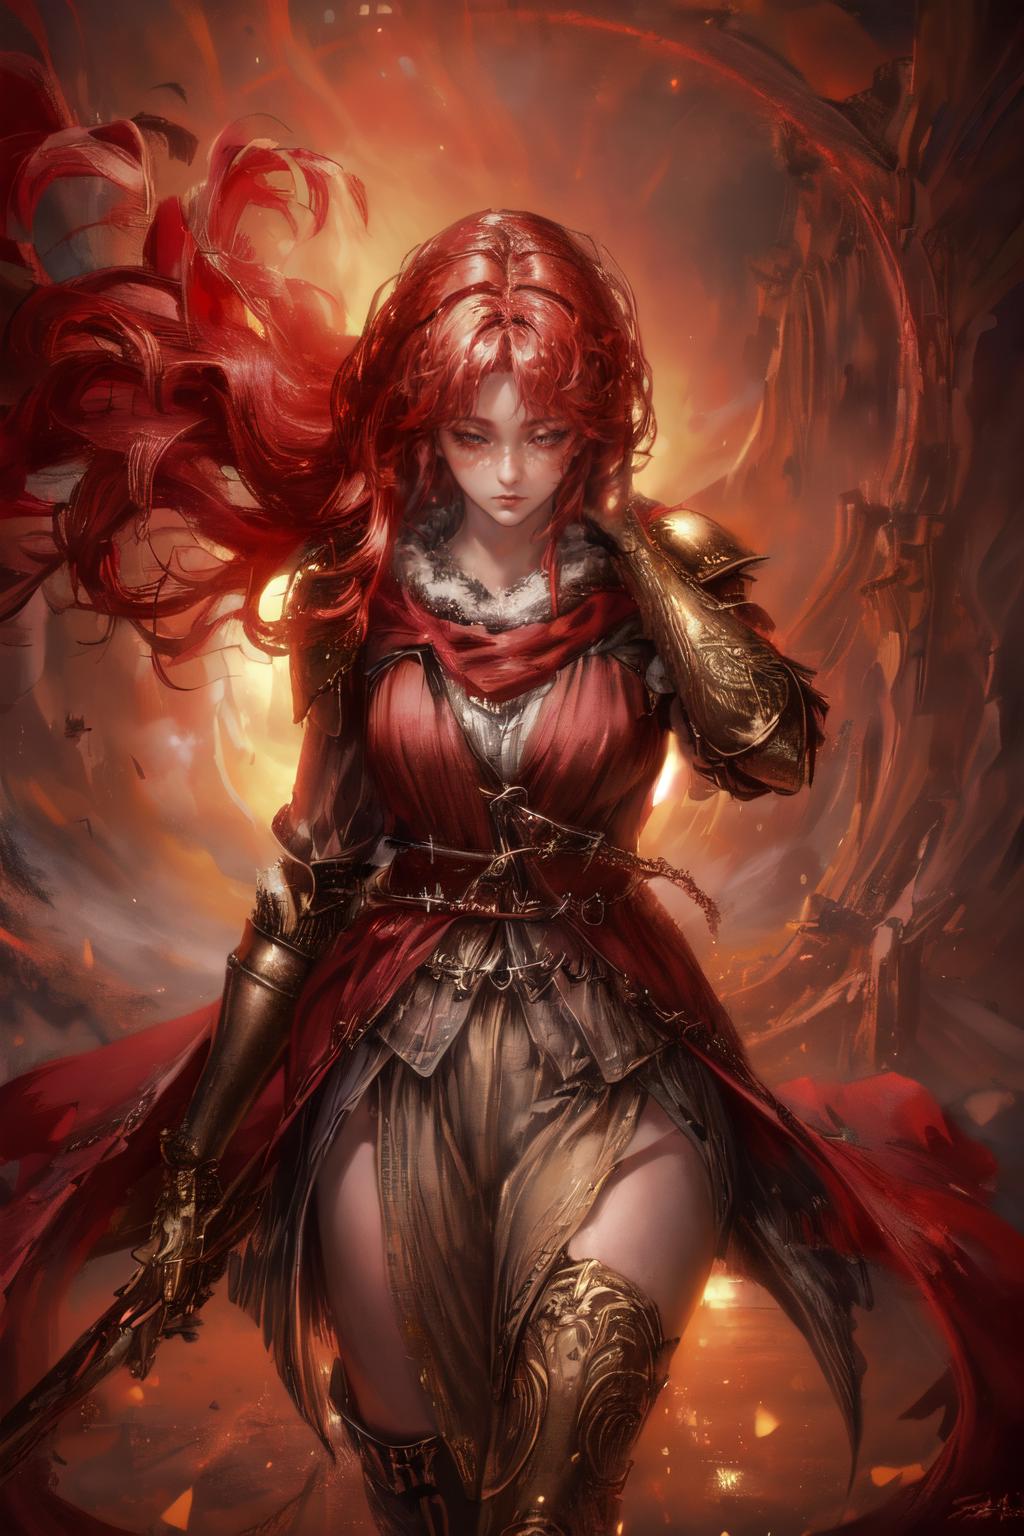 A fantasy art image of a warrior woman with a sword, red hair, and red clothing.